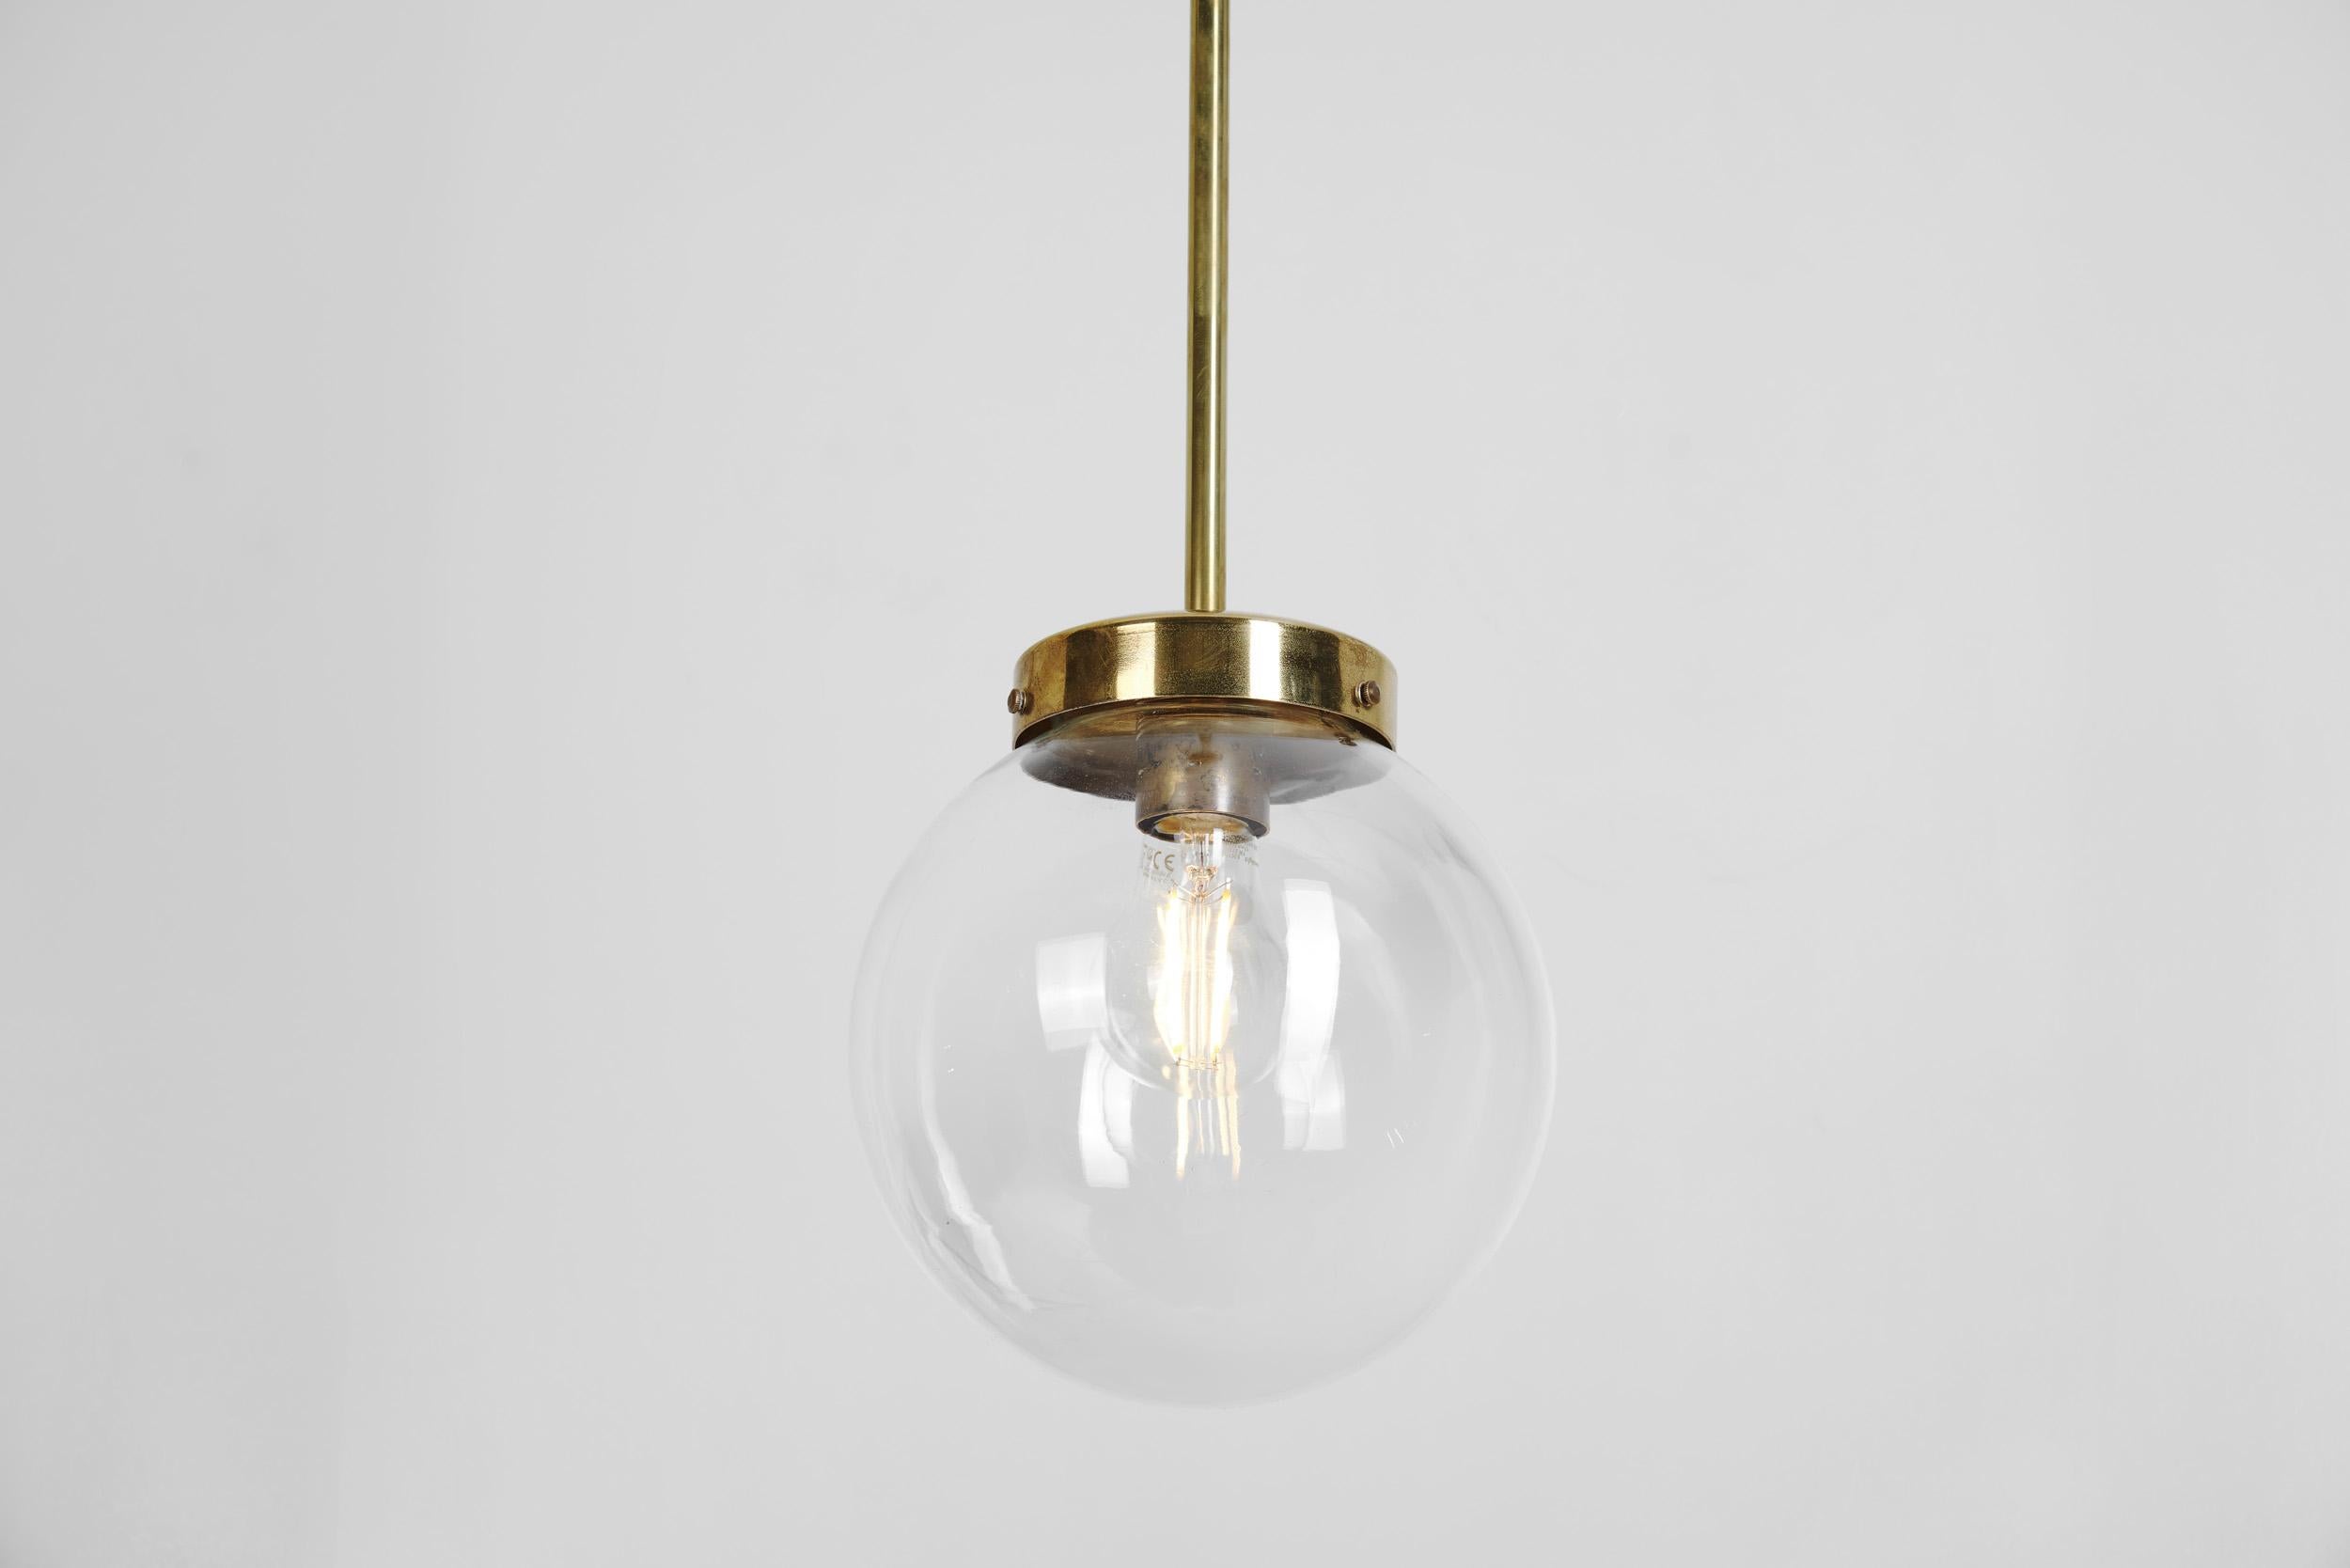 Mid-Century Modern Brass and Glass Ceiling Lamp, Europe ca 1950s For Sale 4